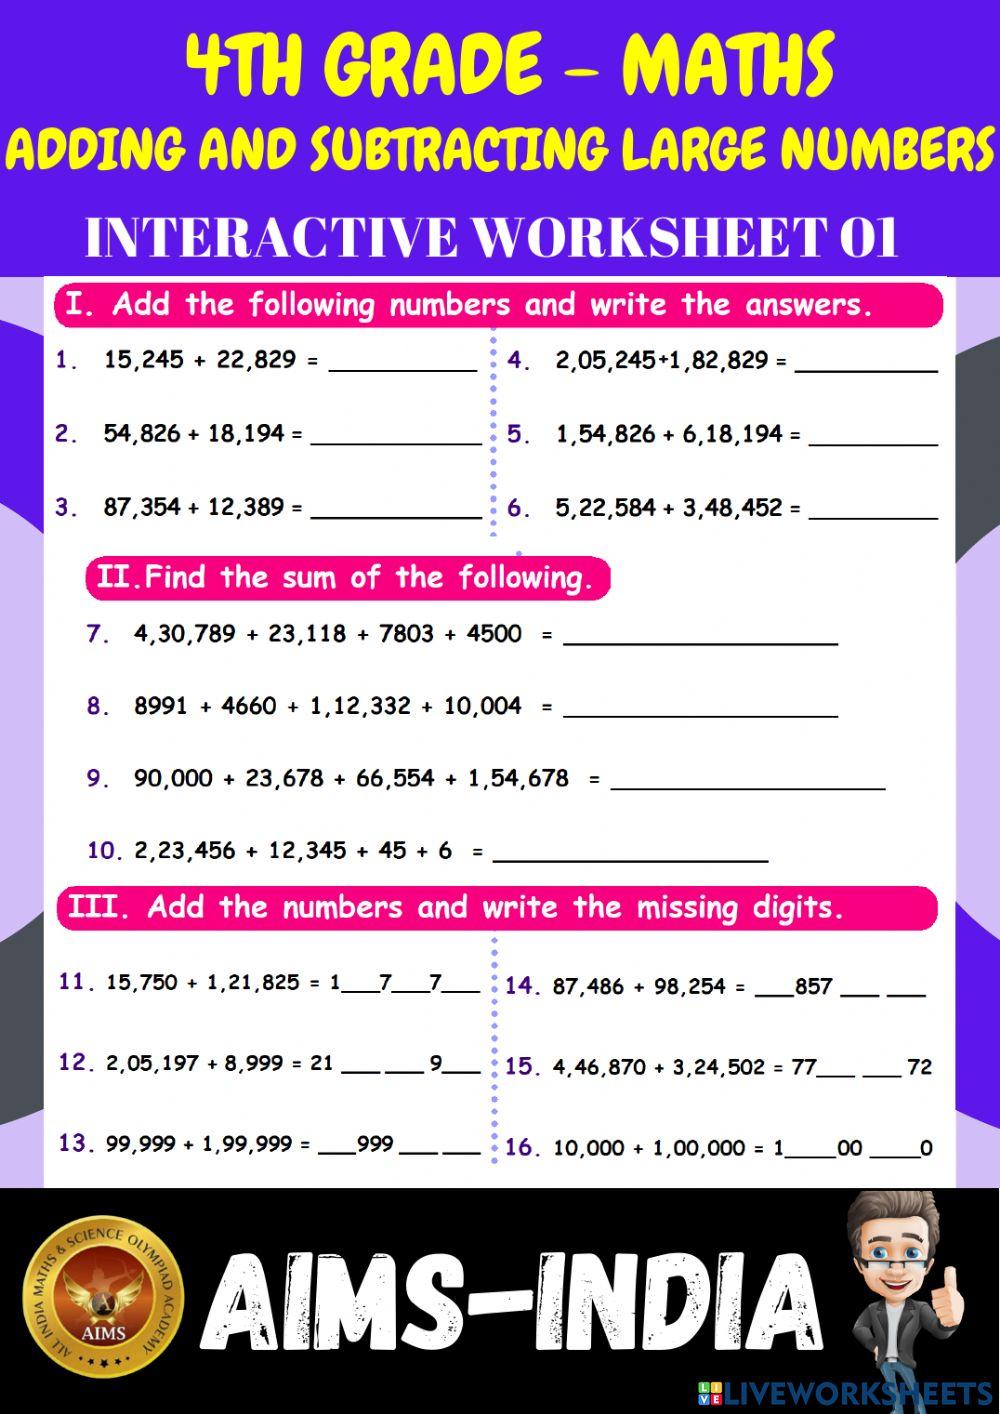 4th-maths-ps01-adding and subtracting large numbers - ch 02